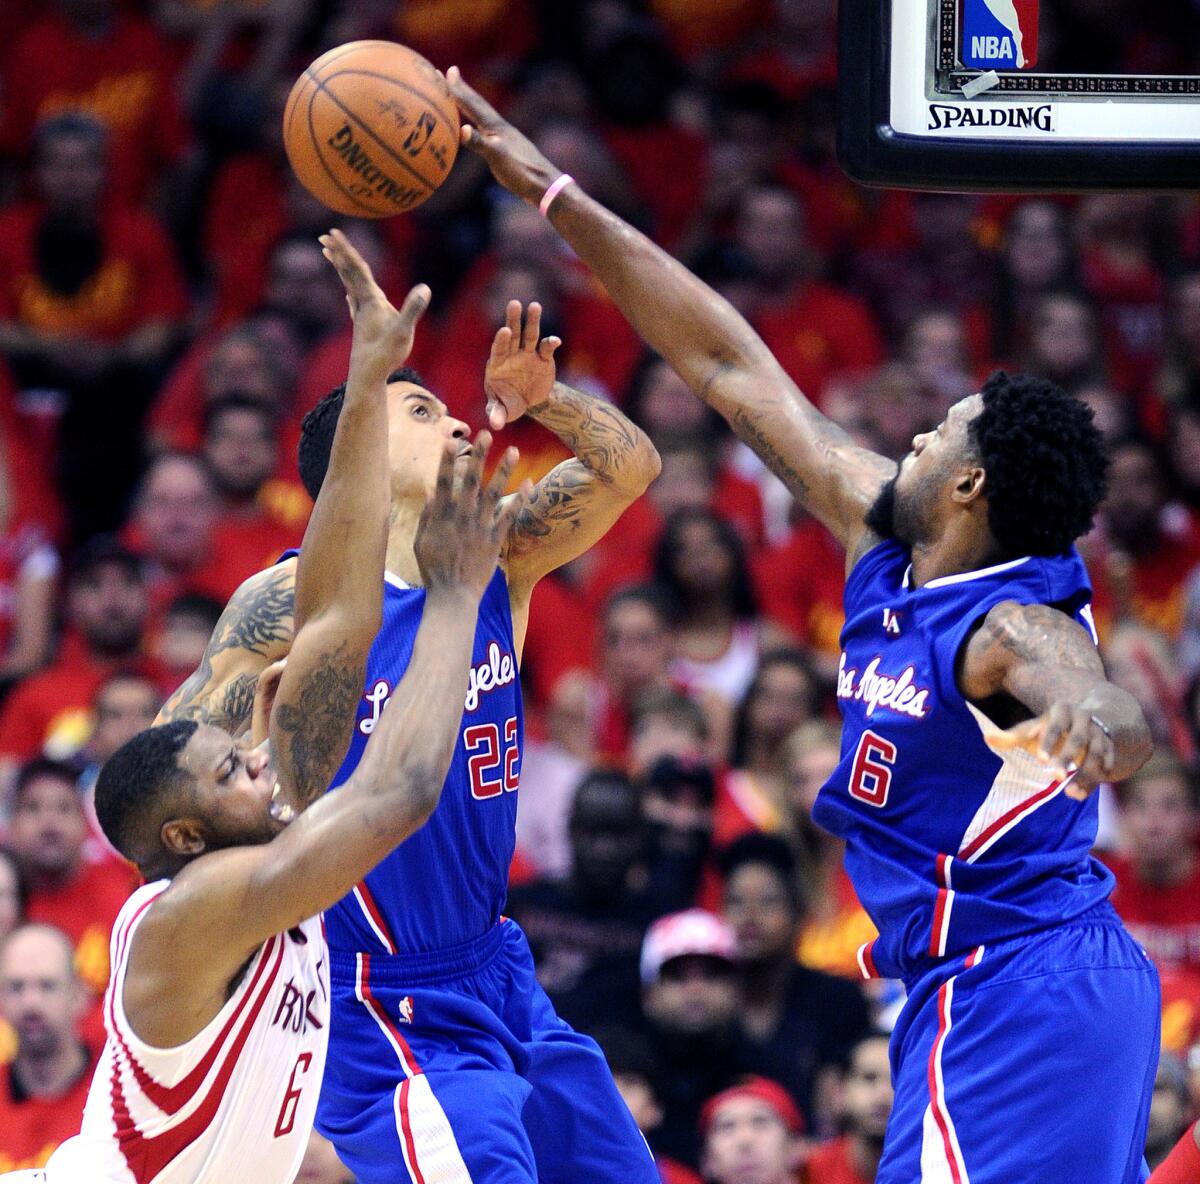 Rockets forward Terrence Jones (6) has his shot blocked by Clippers center DeAndre Jordan in Game 7.